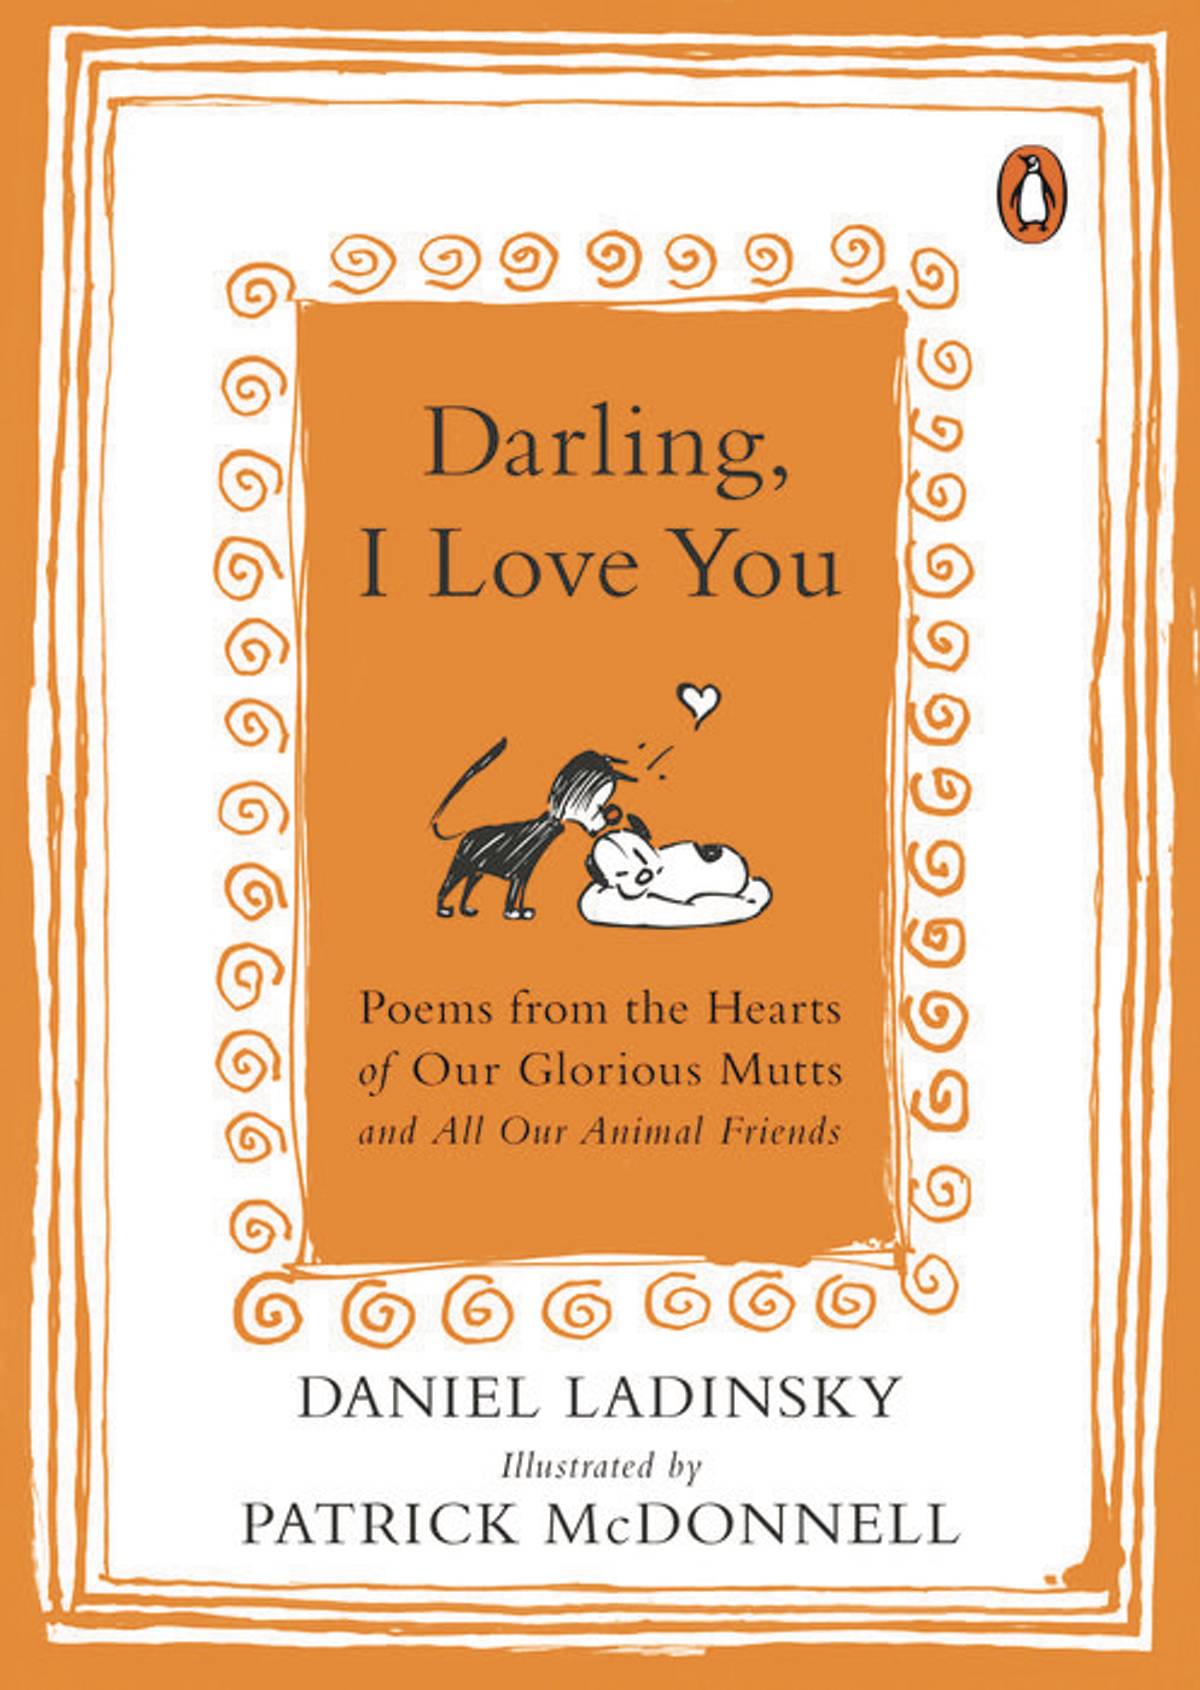 Darling I Love You Poems From Hearts of Mutts Soft Cover